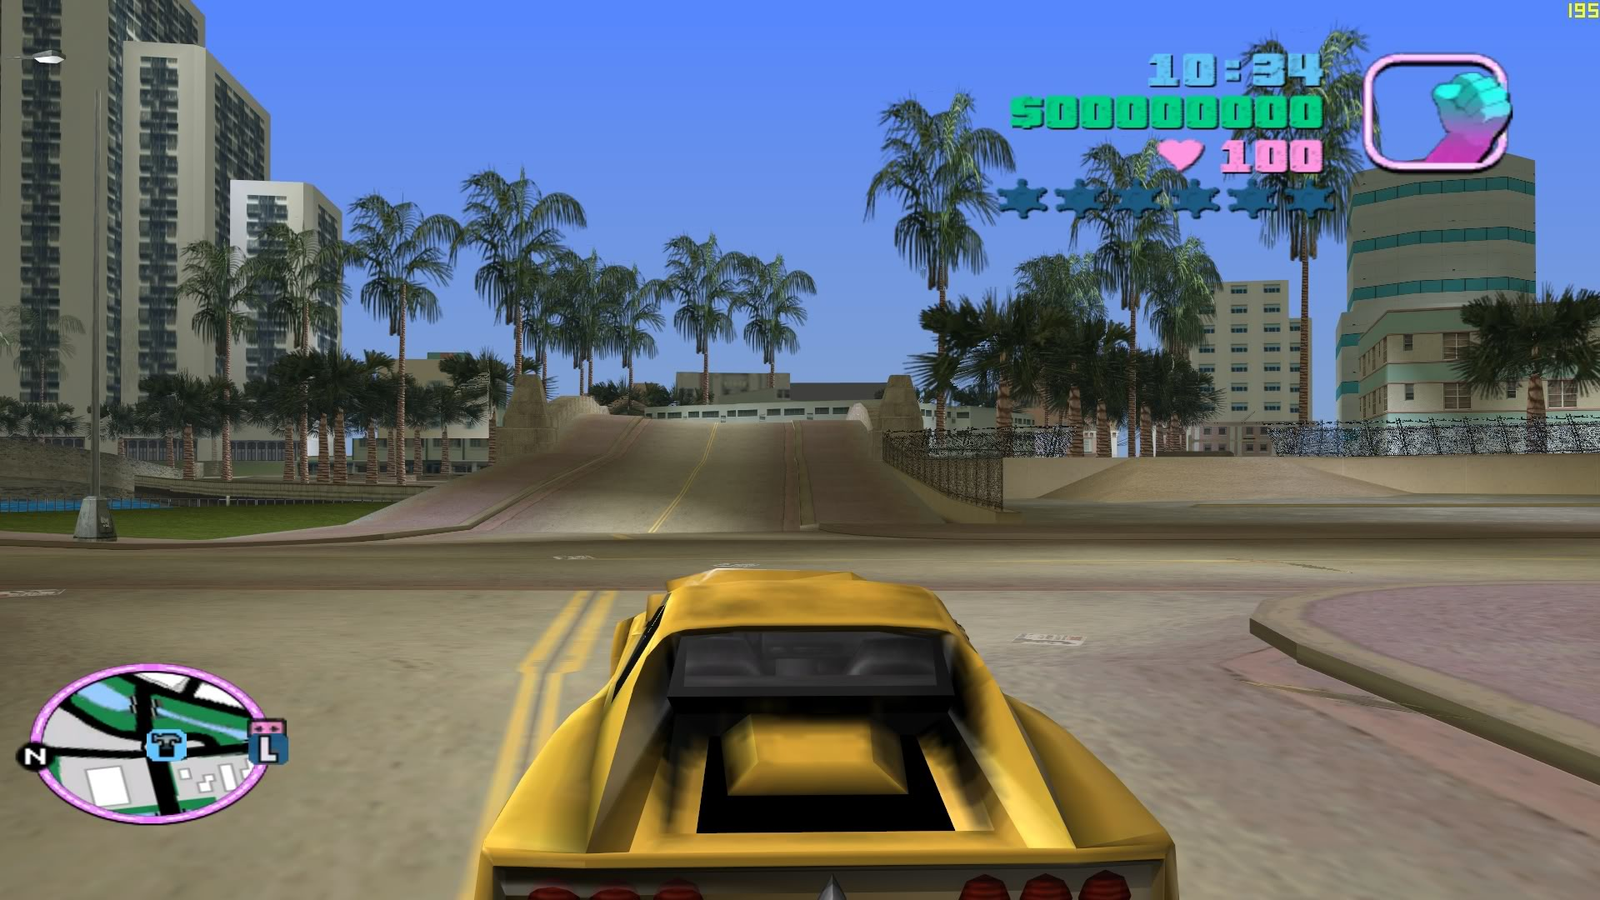 Grand Theft Auto 3 and Vice City Fan Projects Hit by Copyright